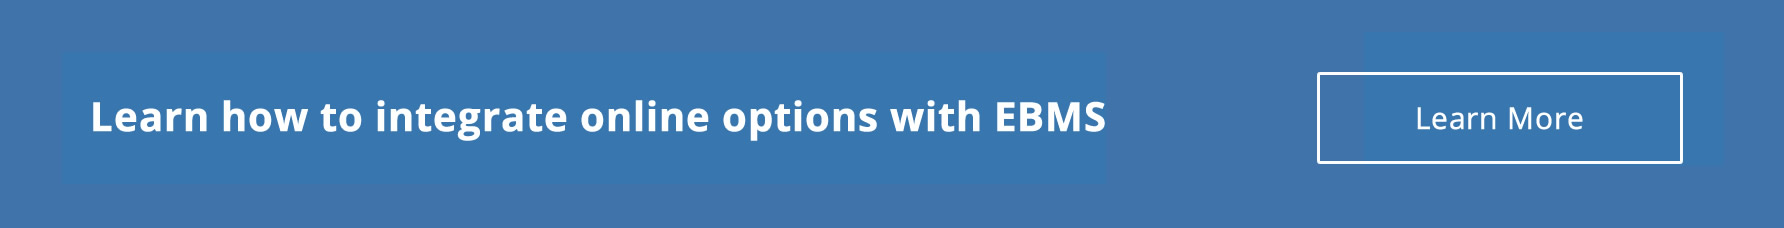 Integrate online options with EBMS